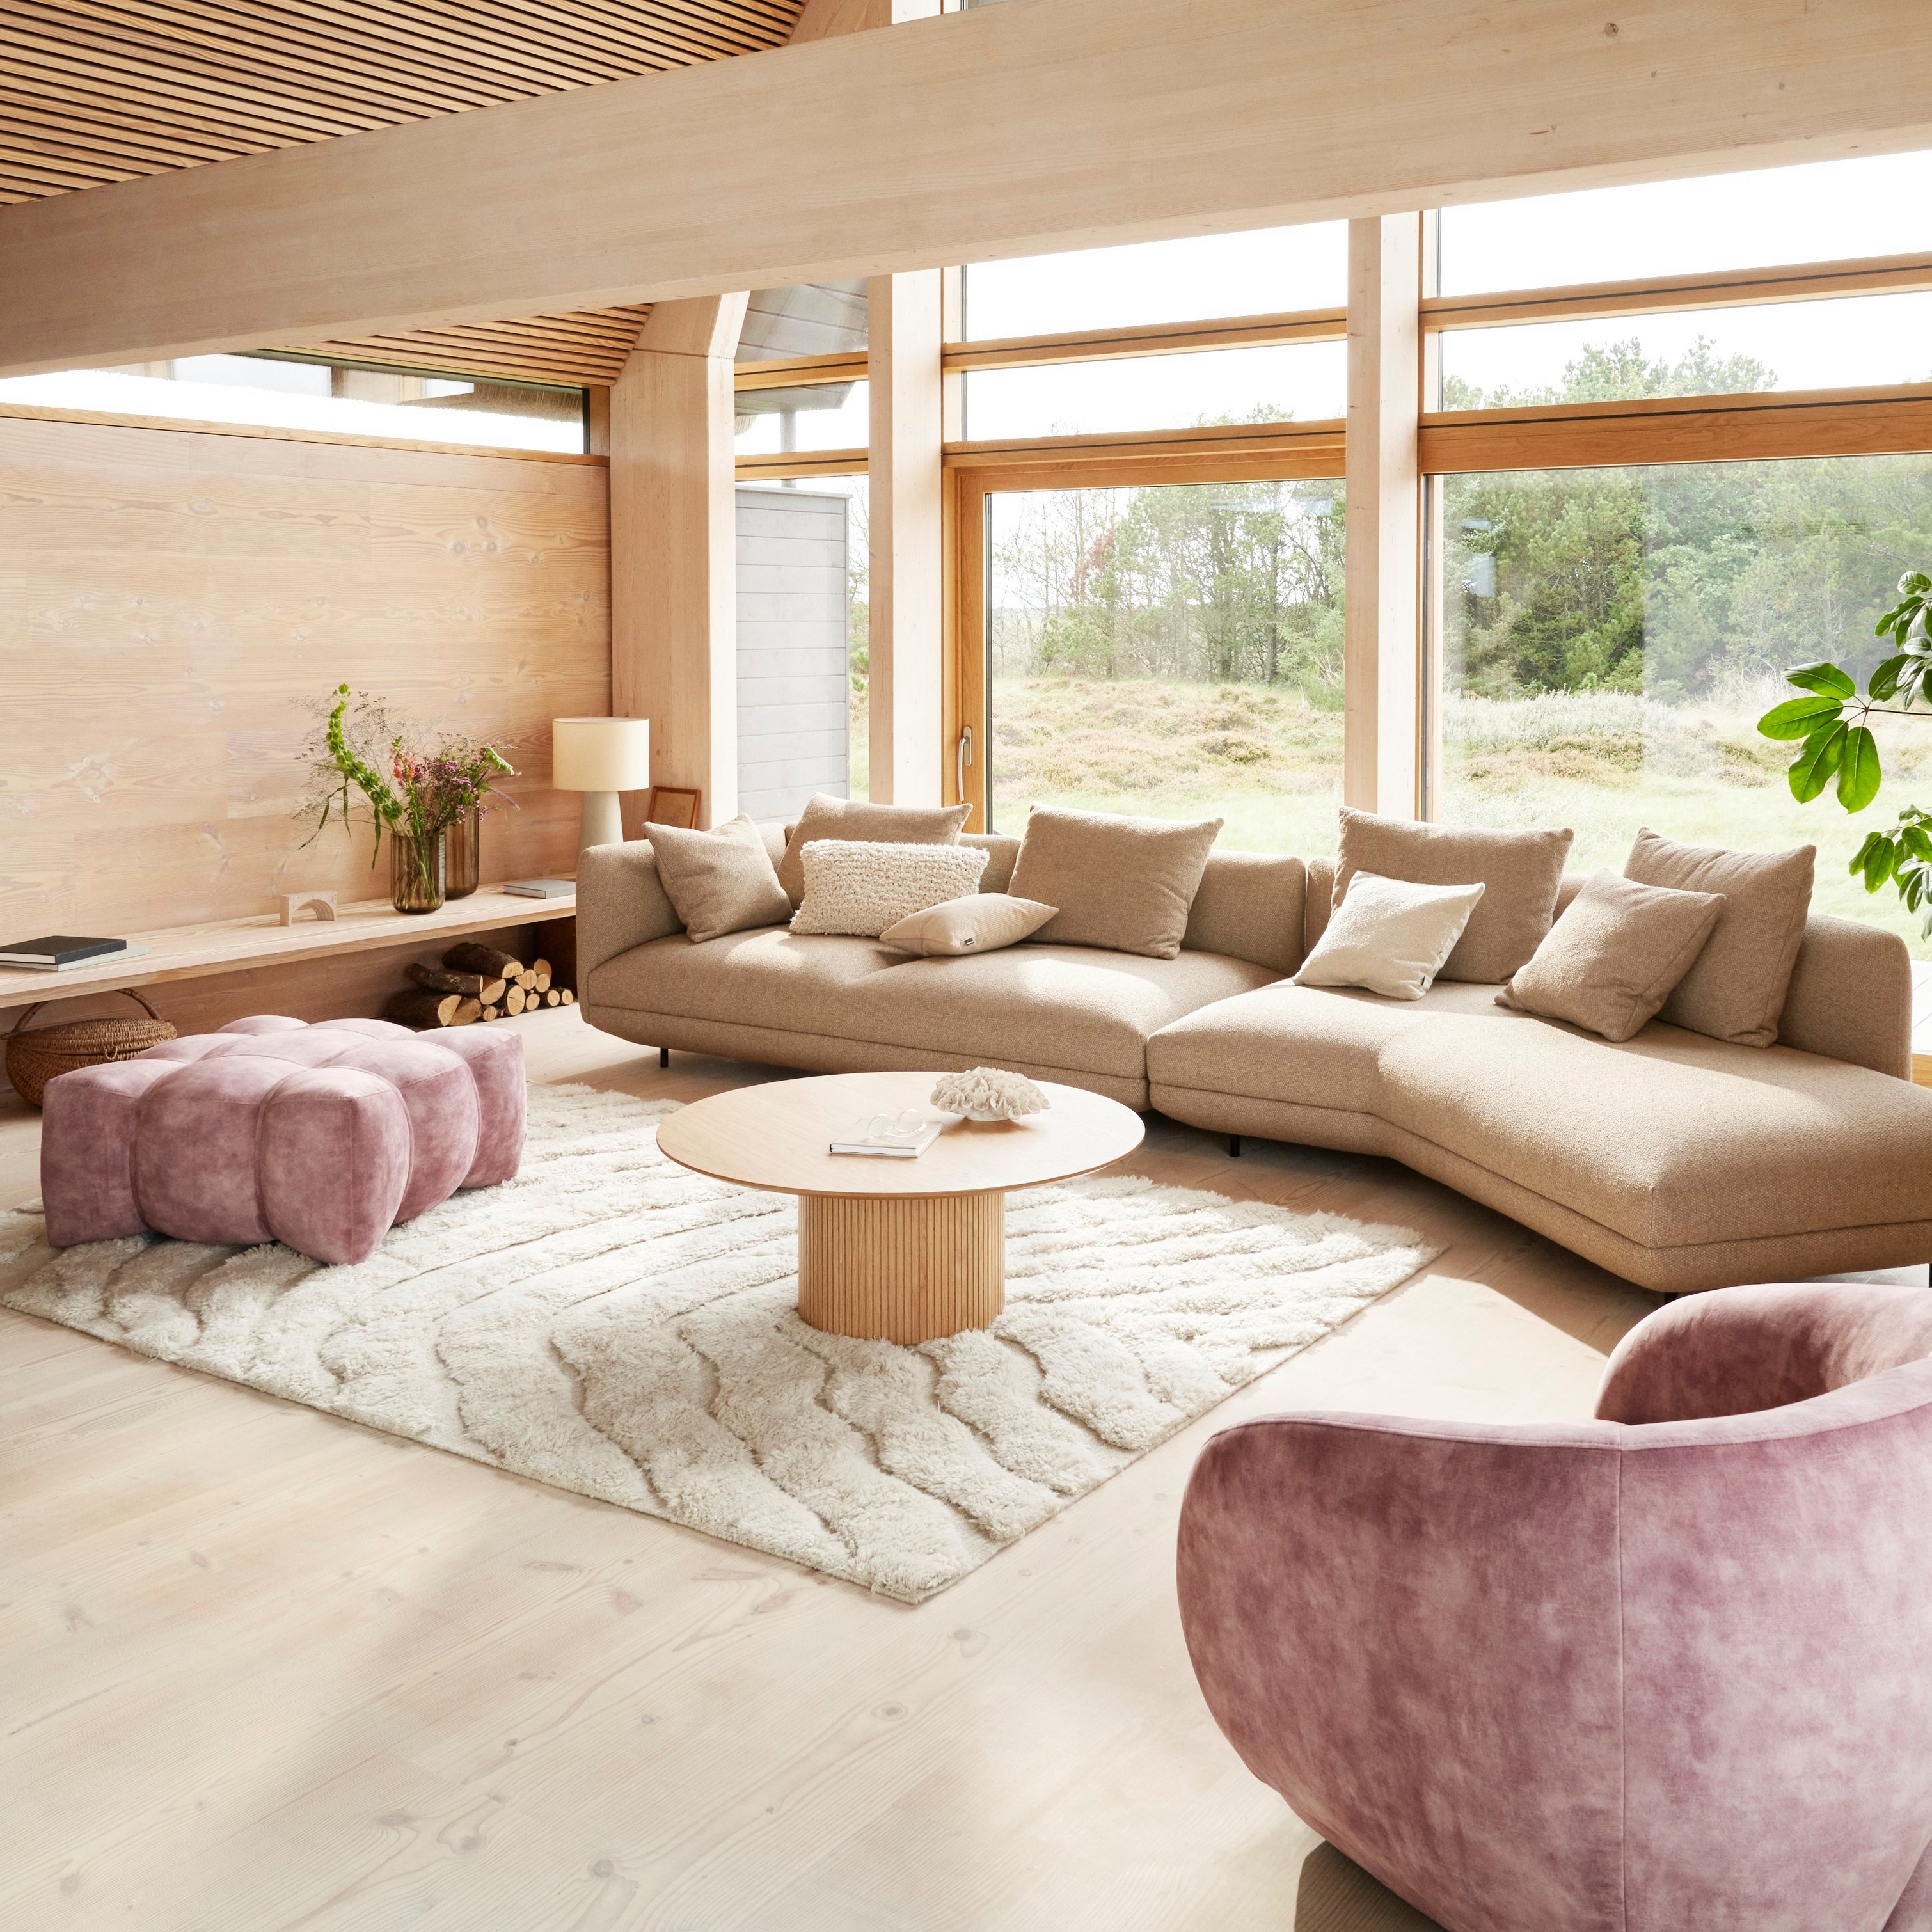 A cozy, modern living room in an A-frame home featuring the Salamanca sofa upholstered in brown Lazio fabric.